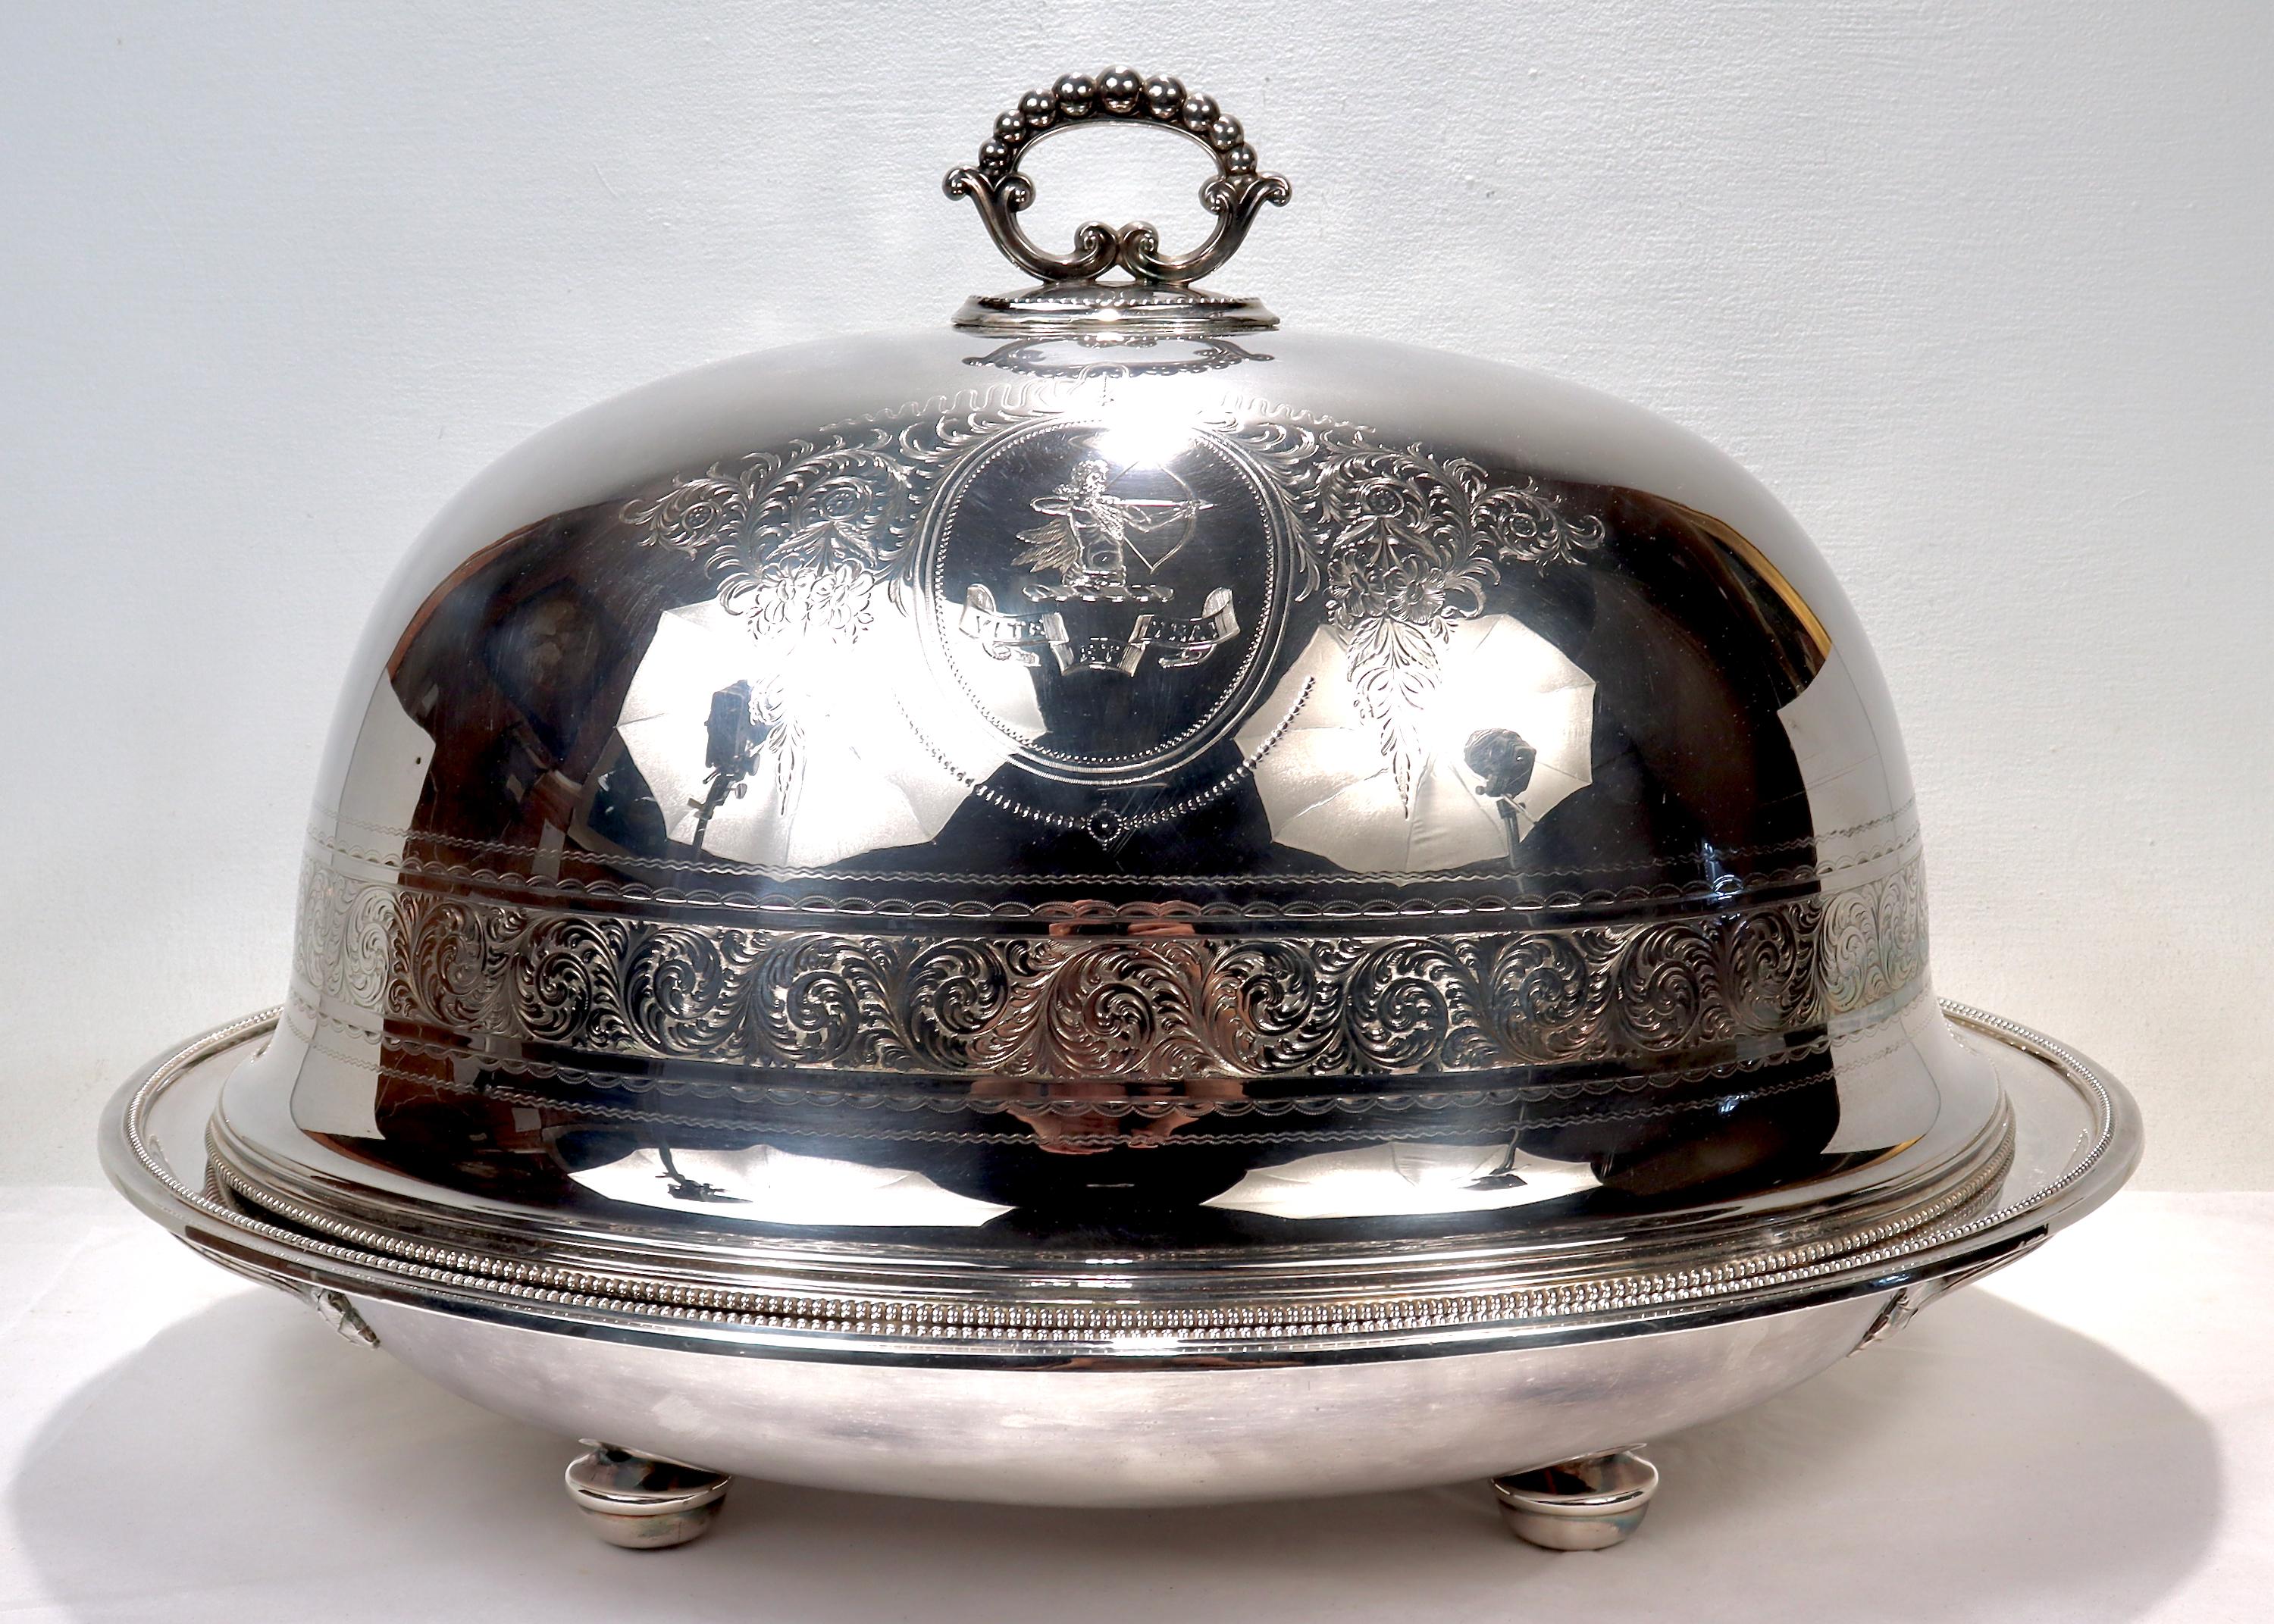 A very fine and large antique Armorial silver plate covered warming roast platter.

By Elkington & Co.

Comprising a large twin handled warming tray and a conforming dome. The hollow bodied tray has a side mounted screw top opening for filling with